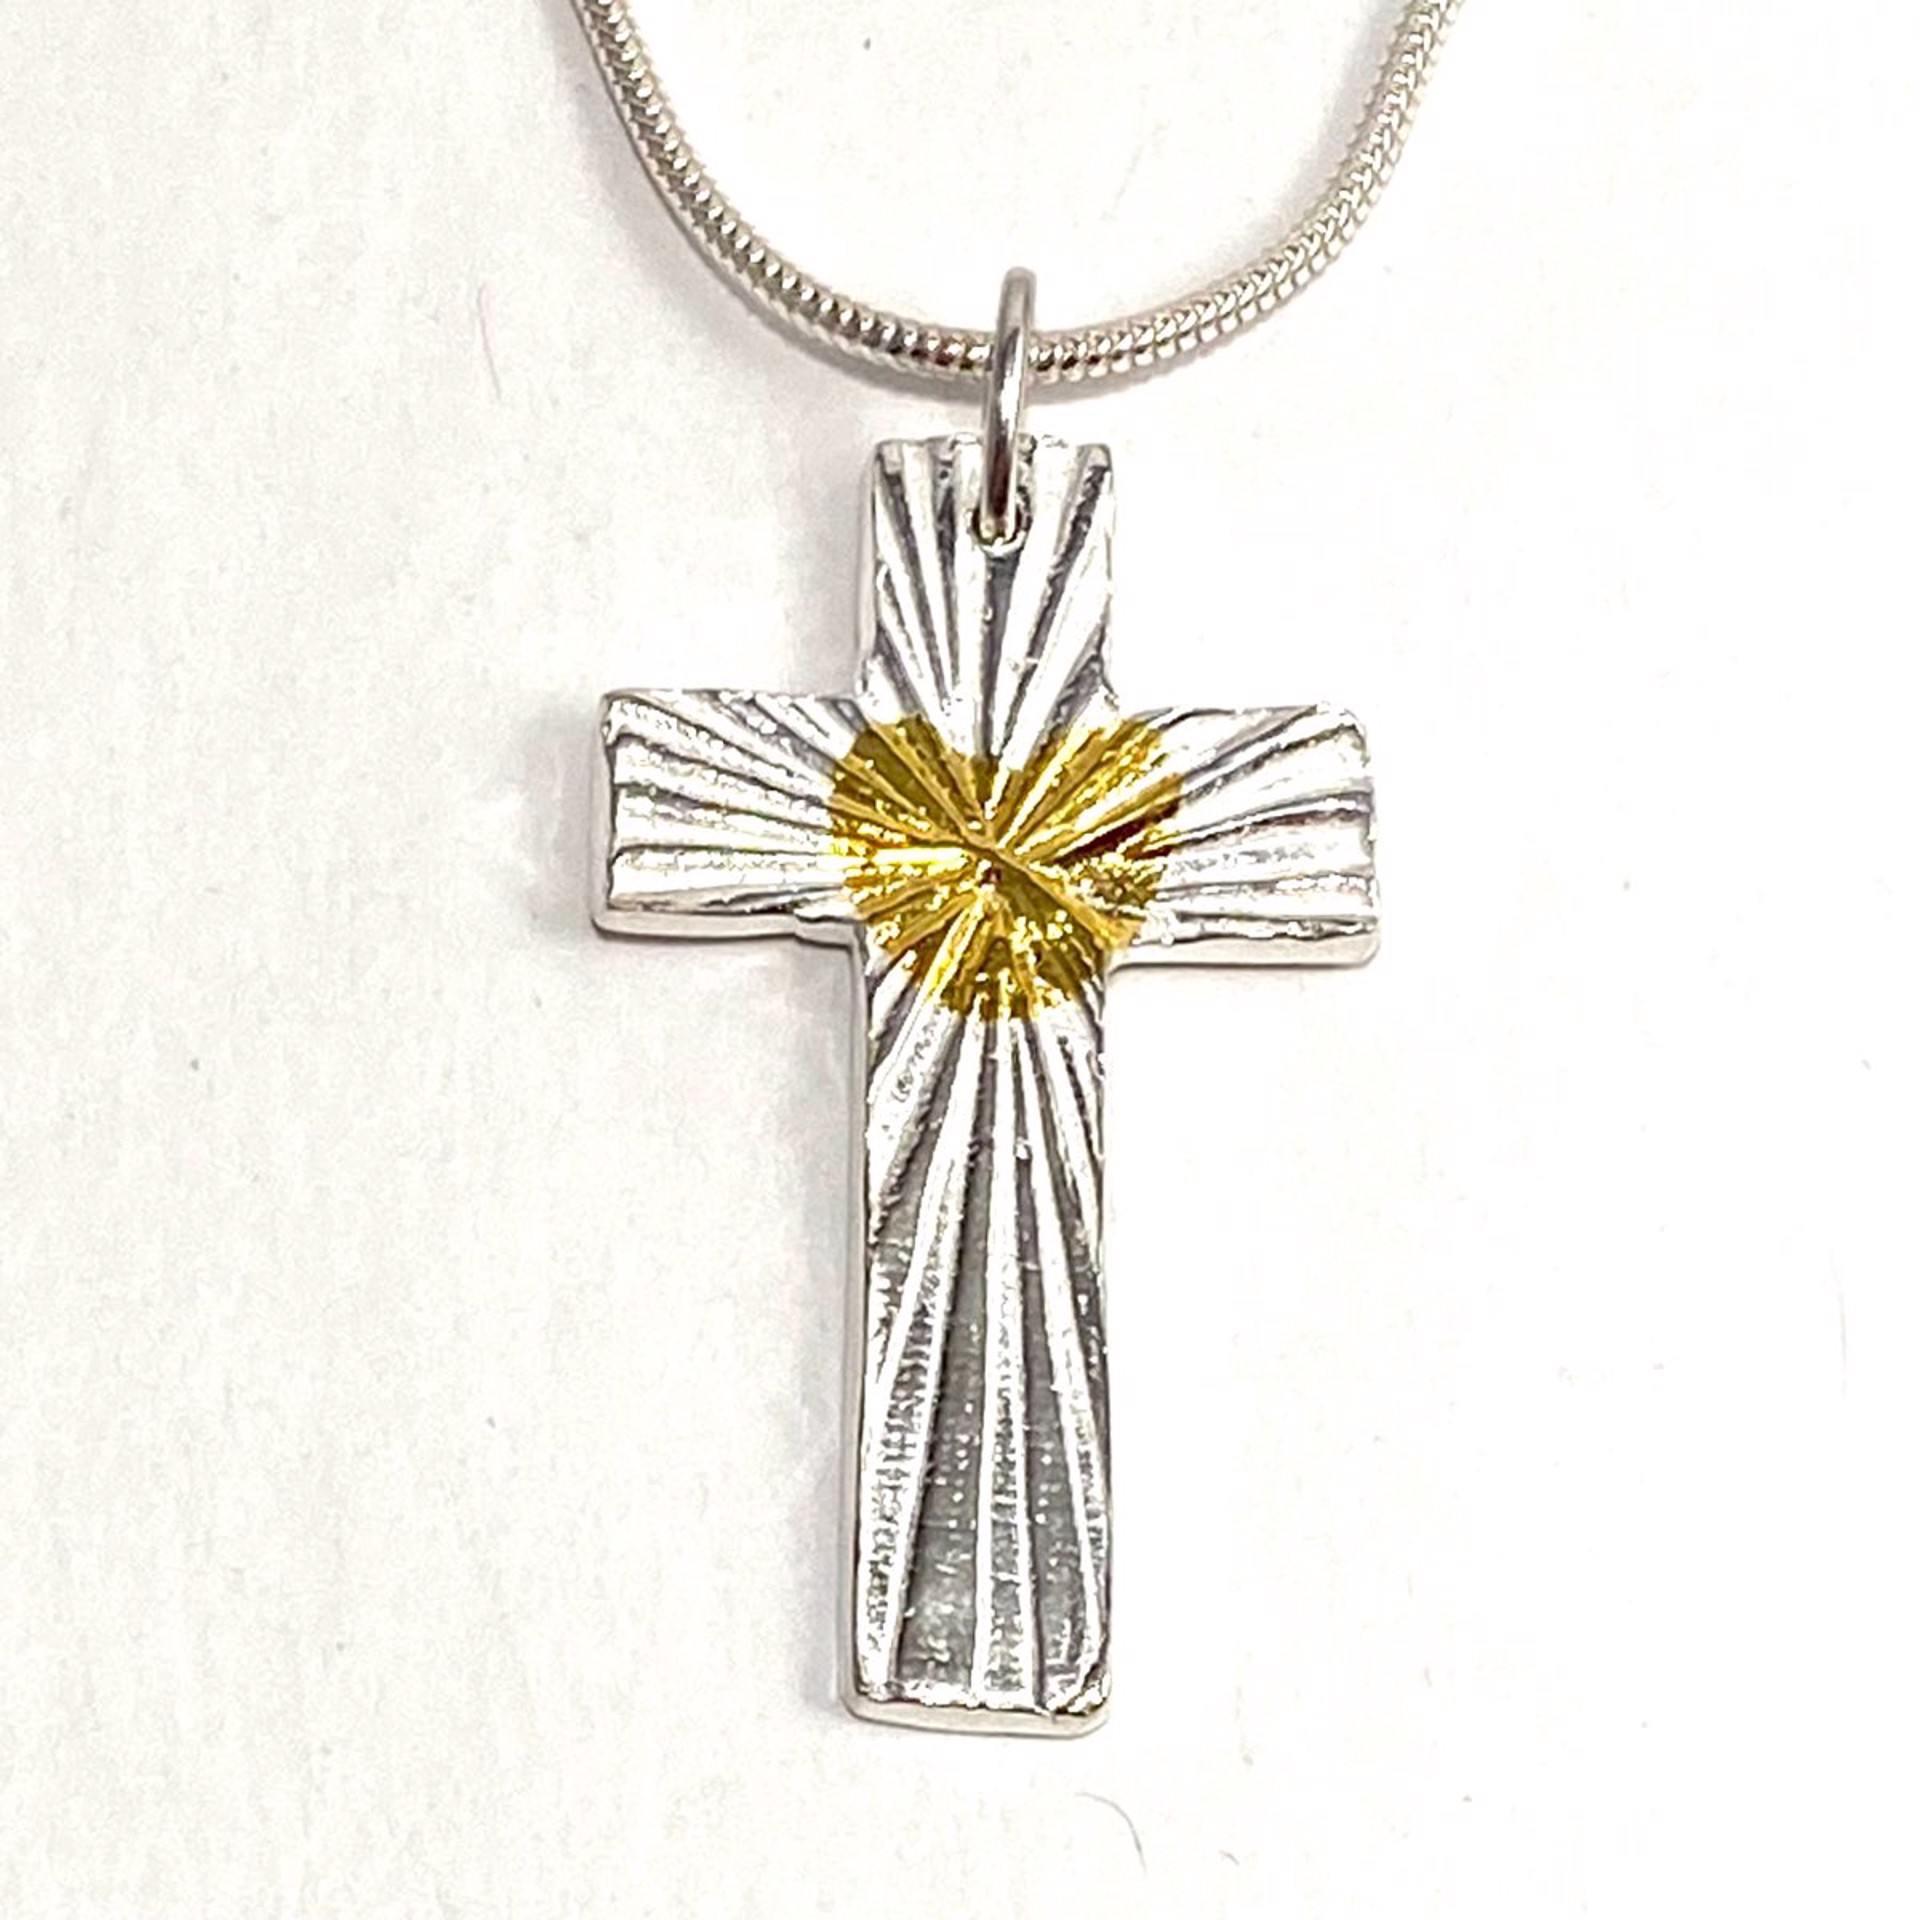 Keum-Boo Fine Silver and Gold Reversible Cross Necklace by Karen Hakim